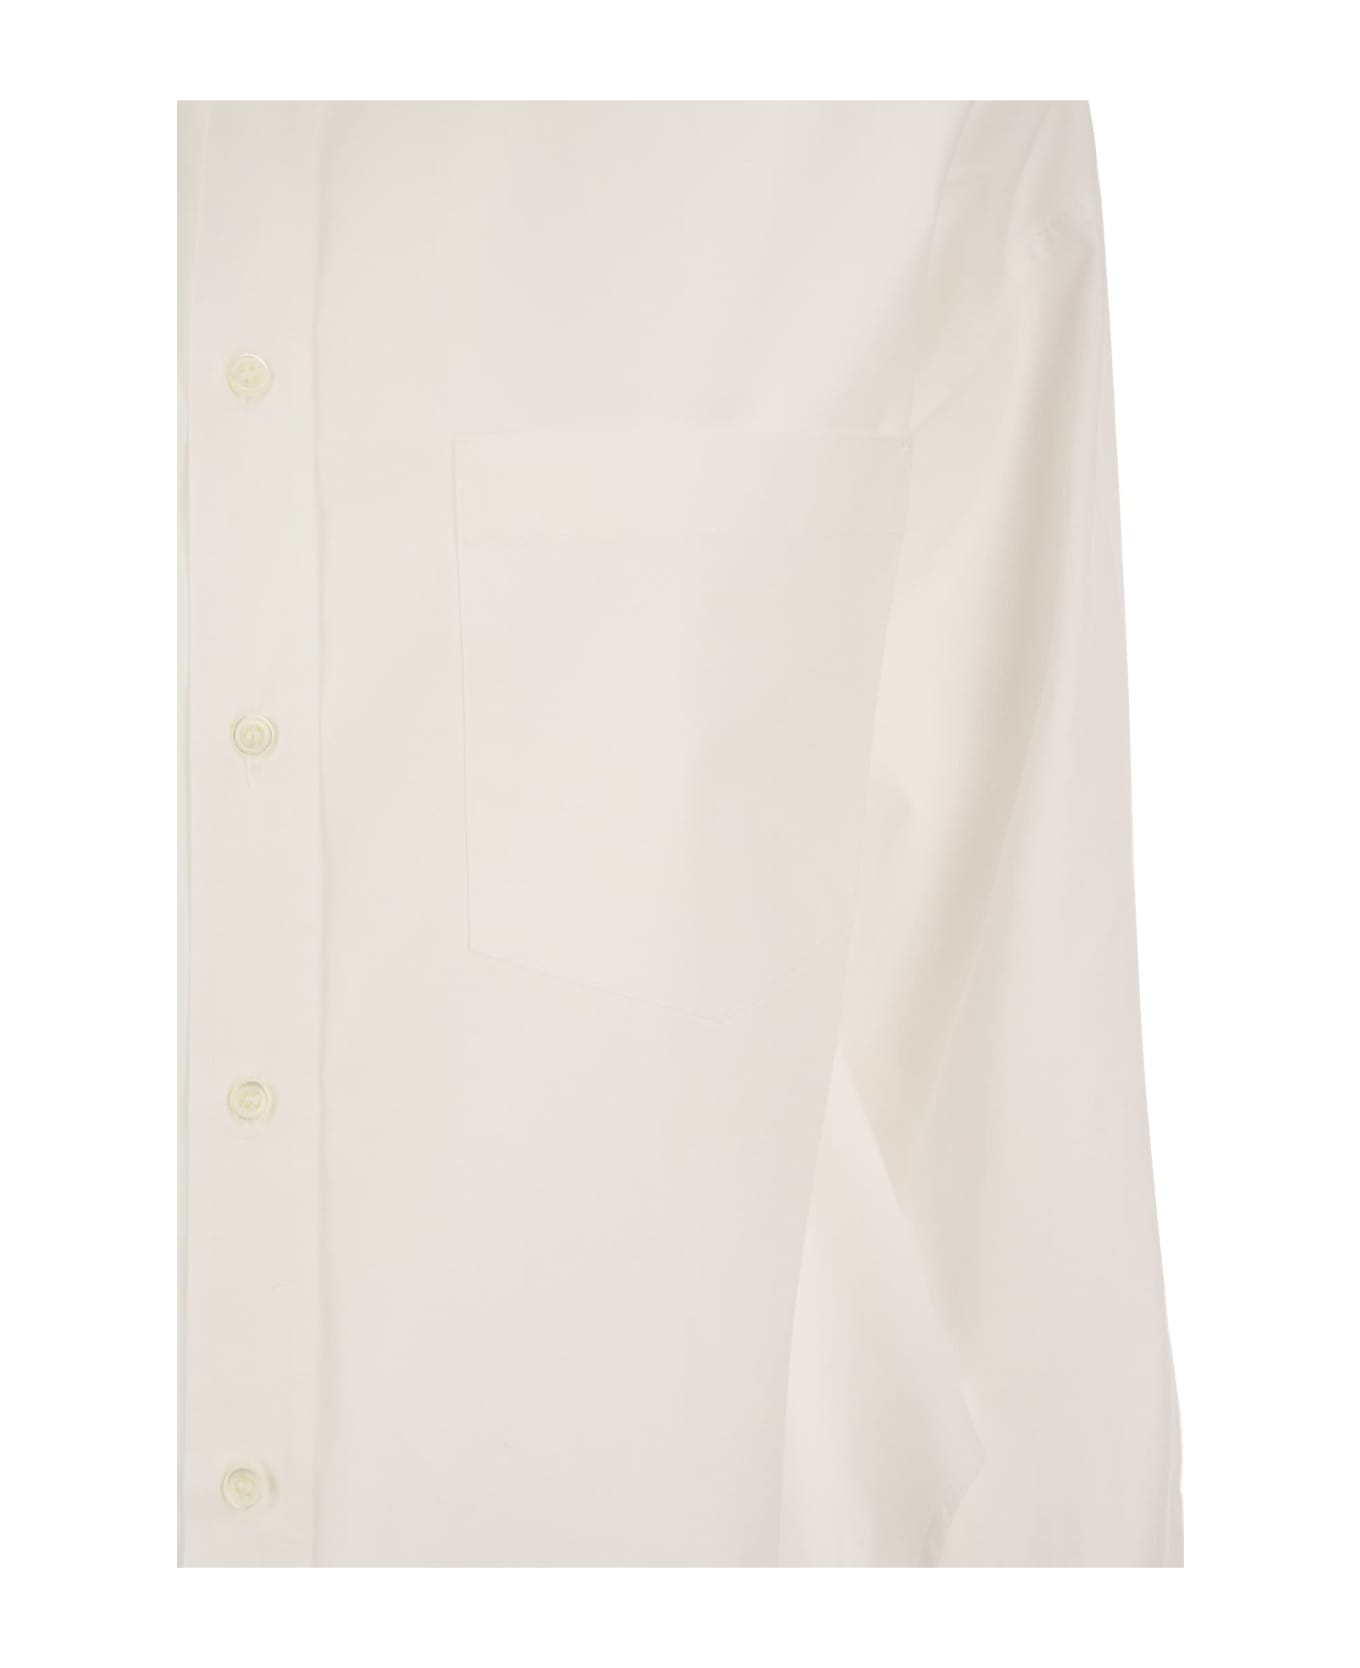 RED Valentino Cropped Shirt In Cotton Poplin - White